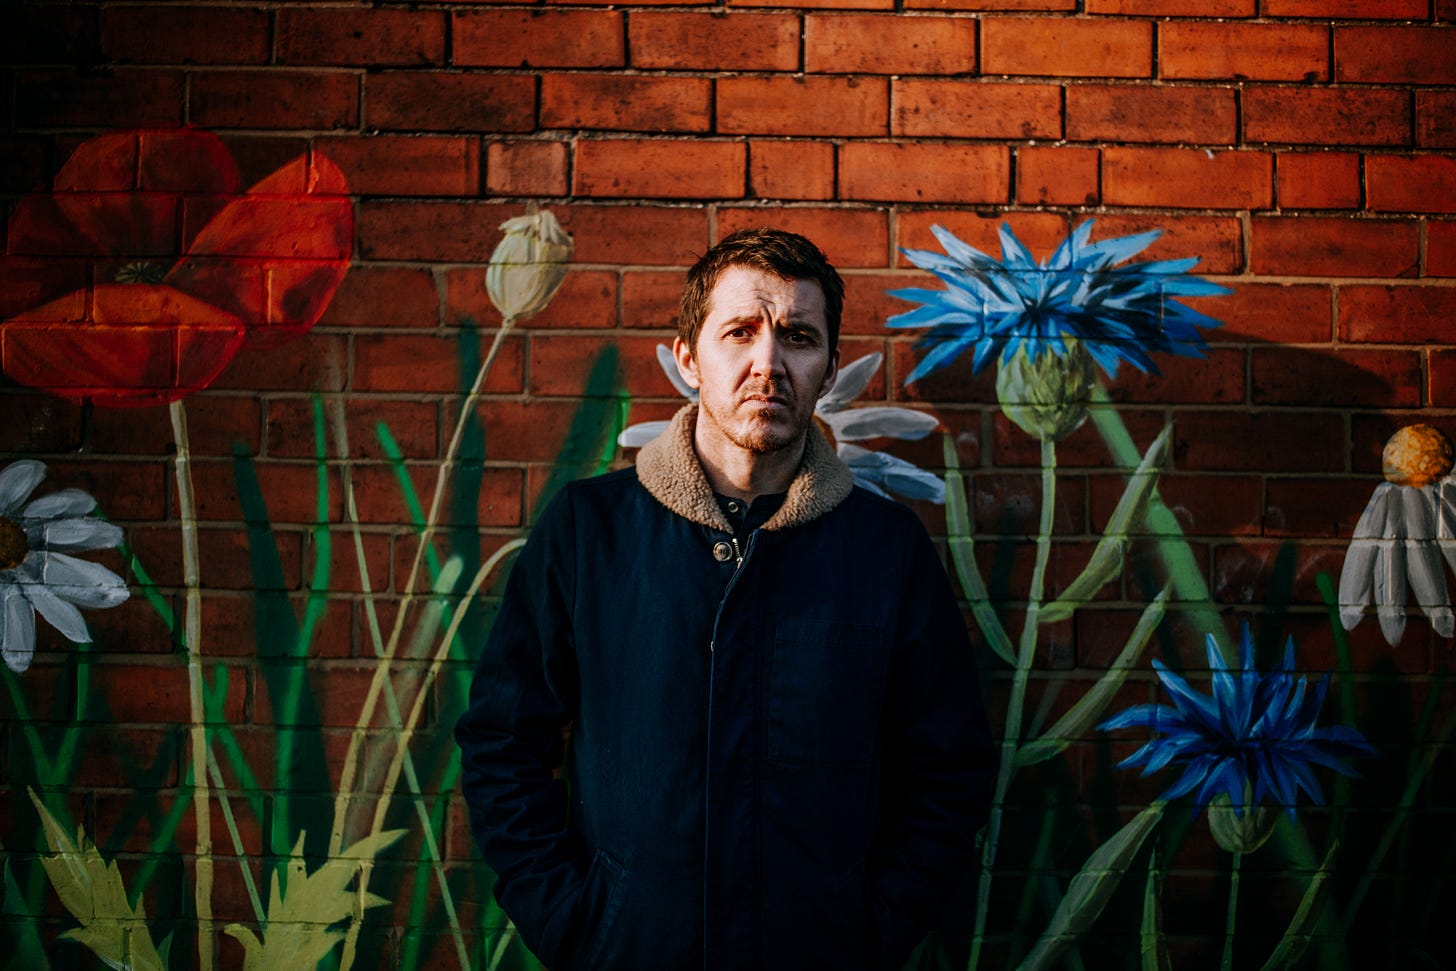 Neil Thomas songwriter and lead singer of Pavey Ark standing in front of a brick wall with flowers painted on it